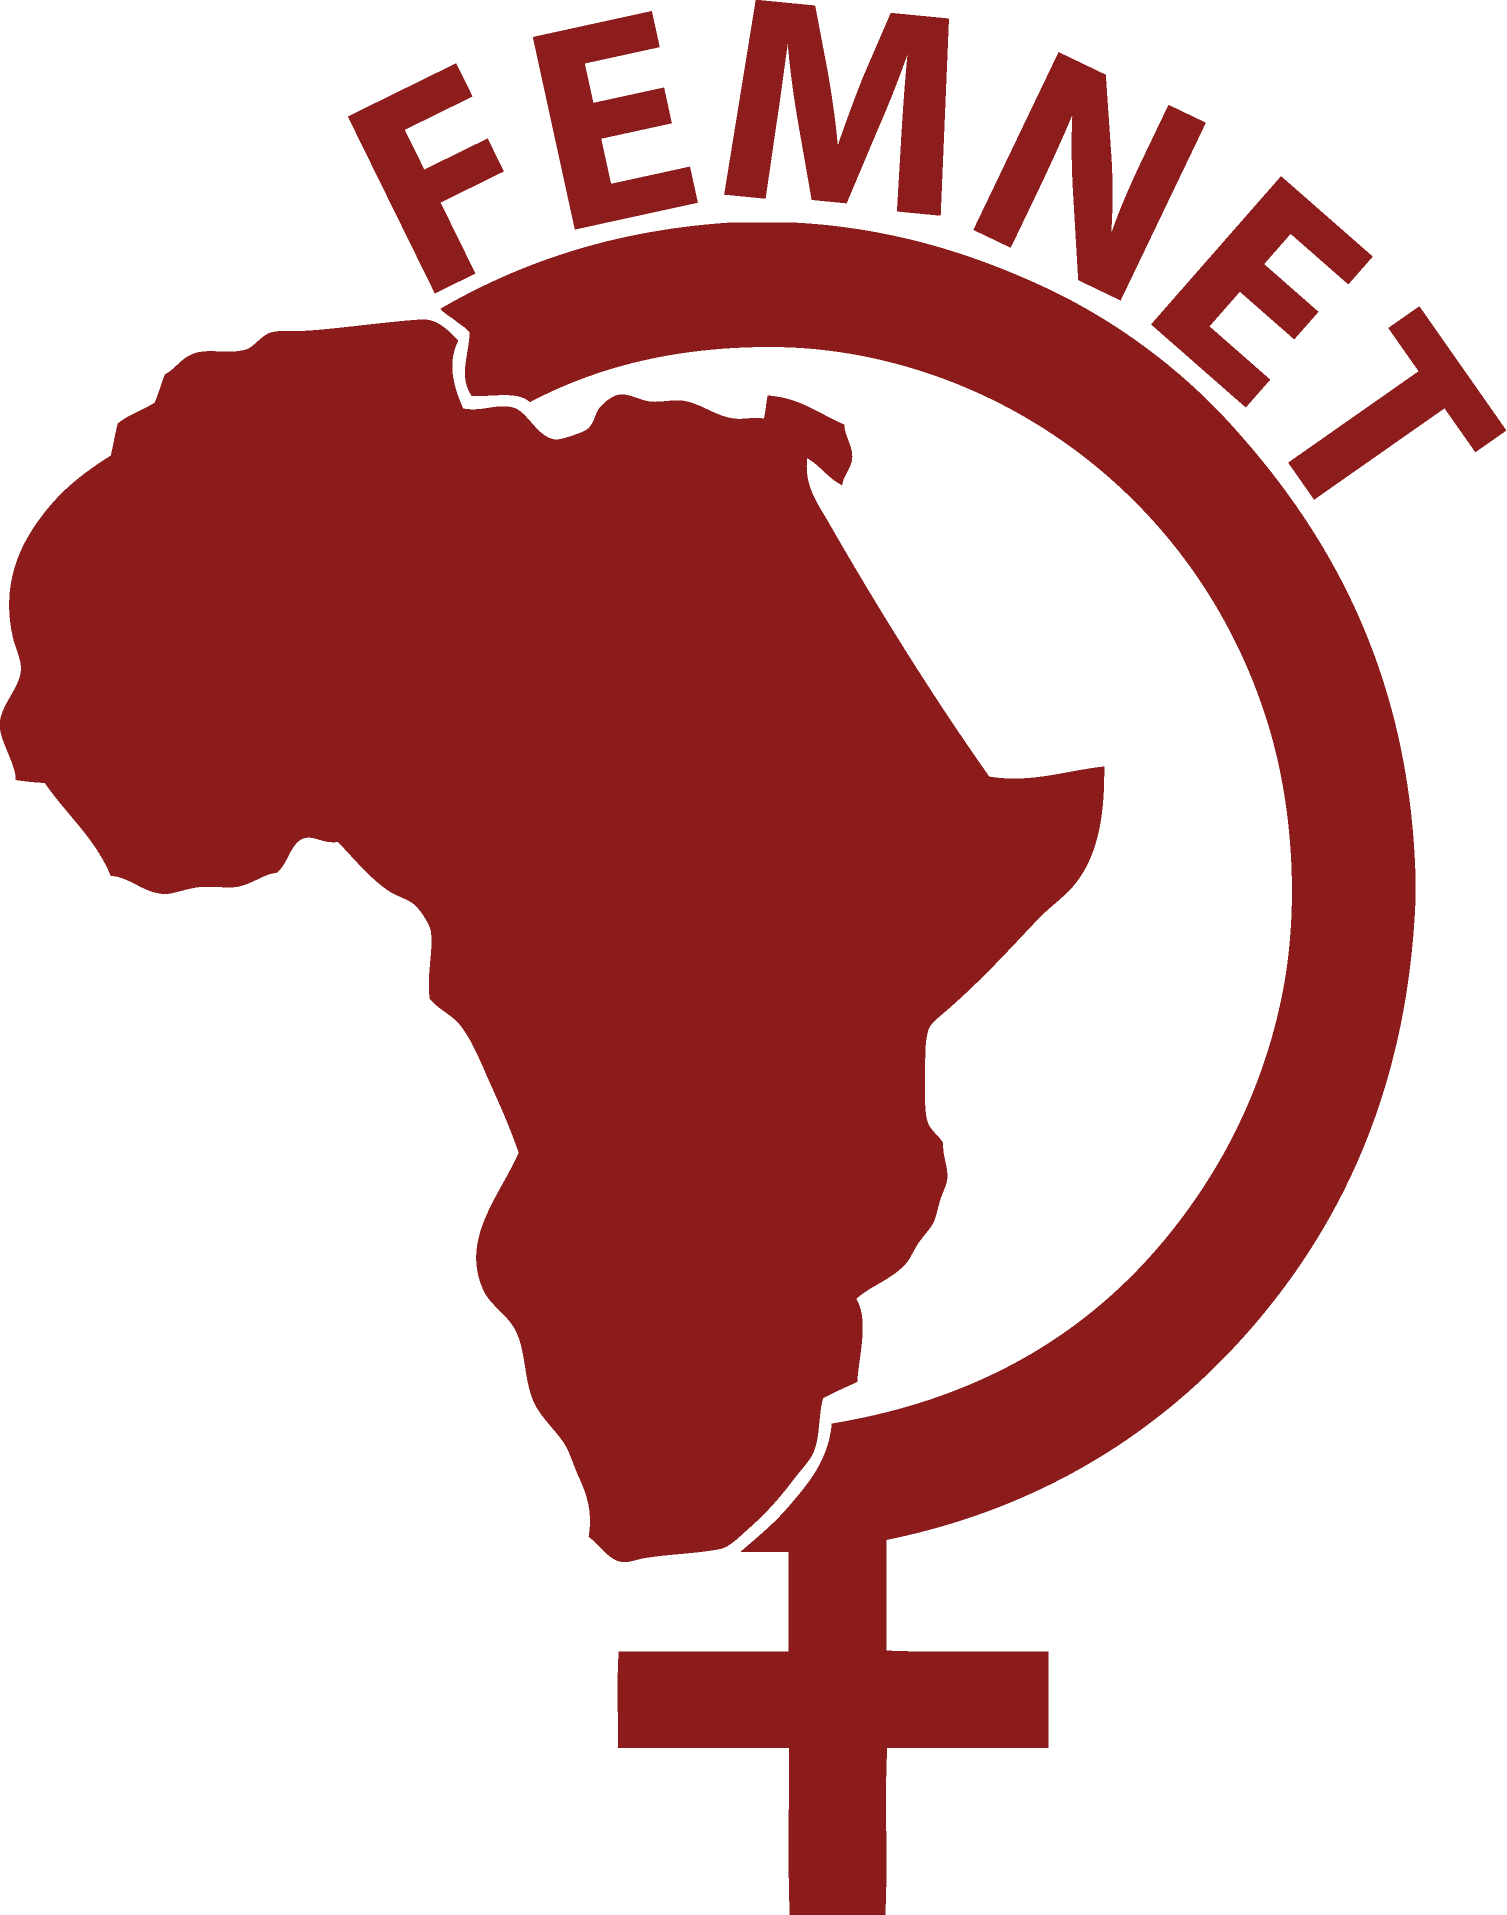 logo for African Women's Development and Communication Network